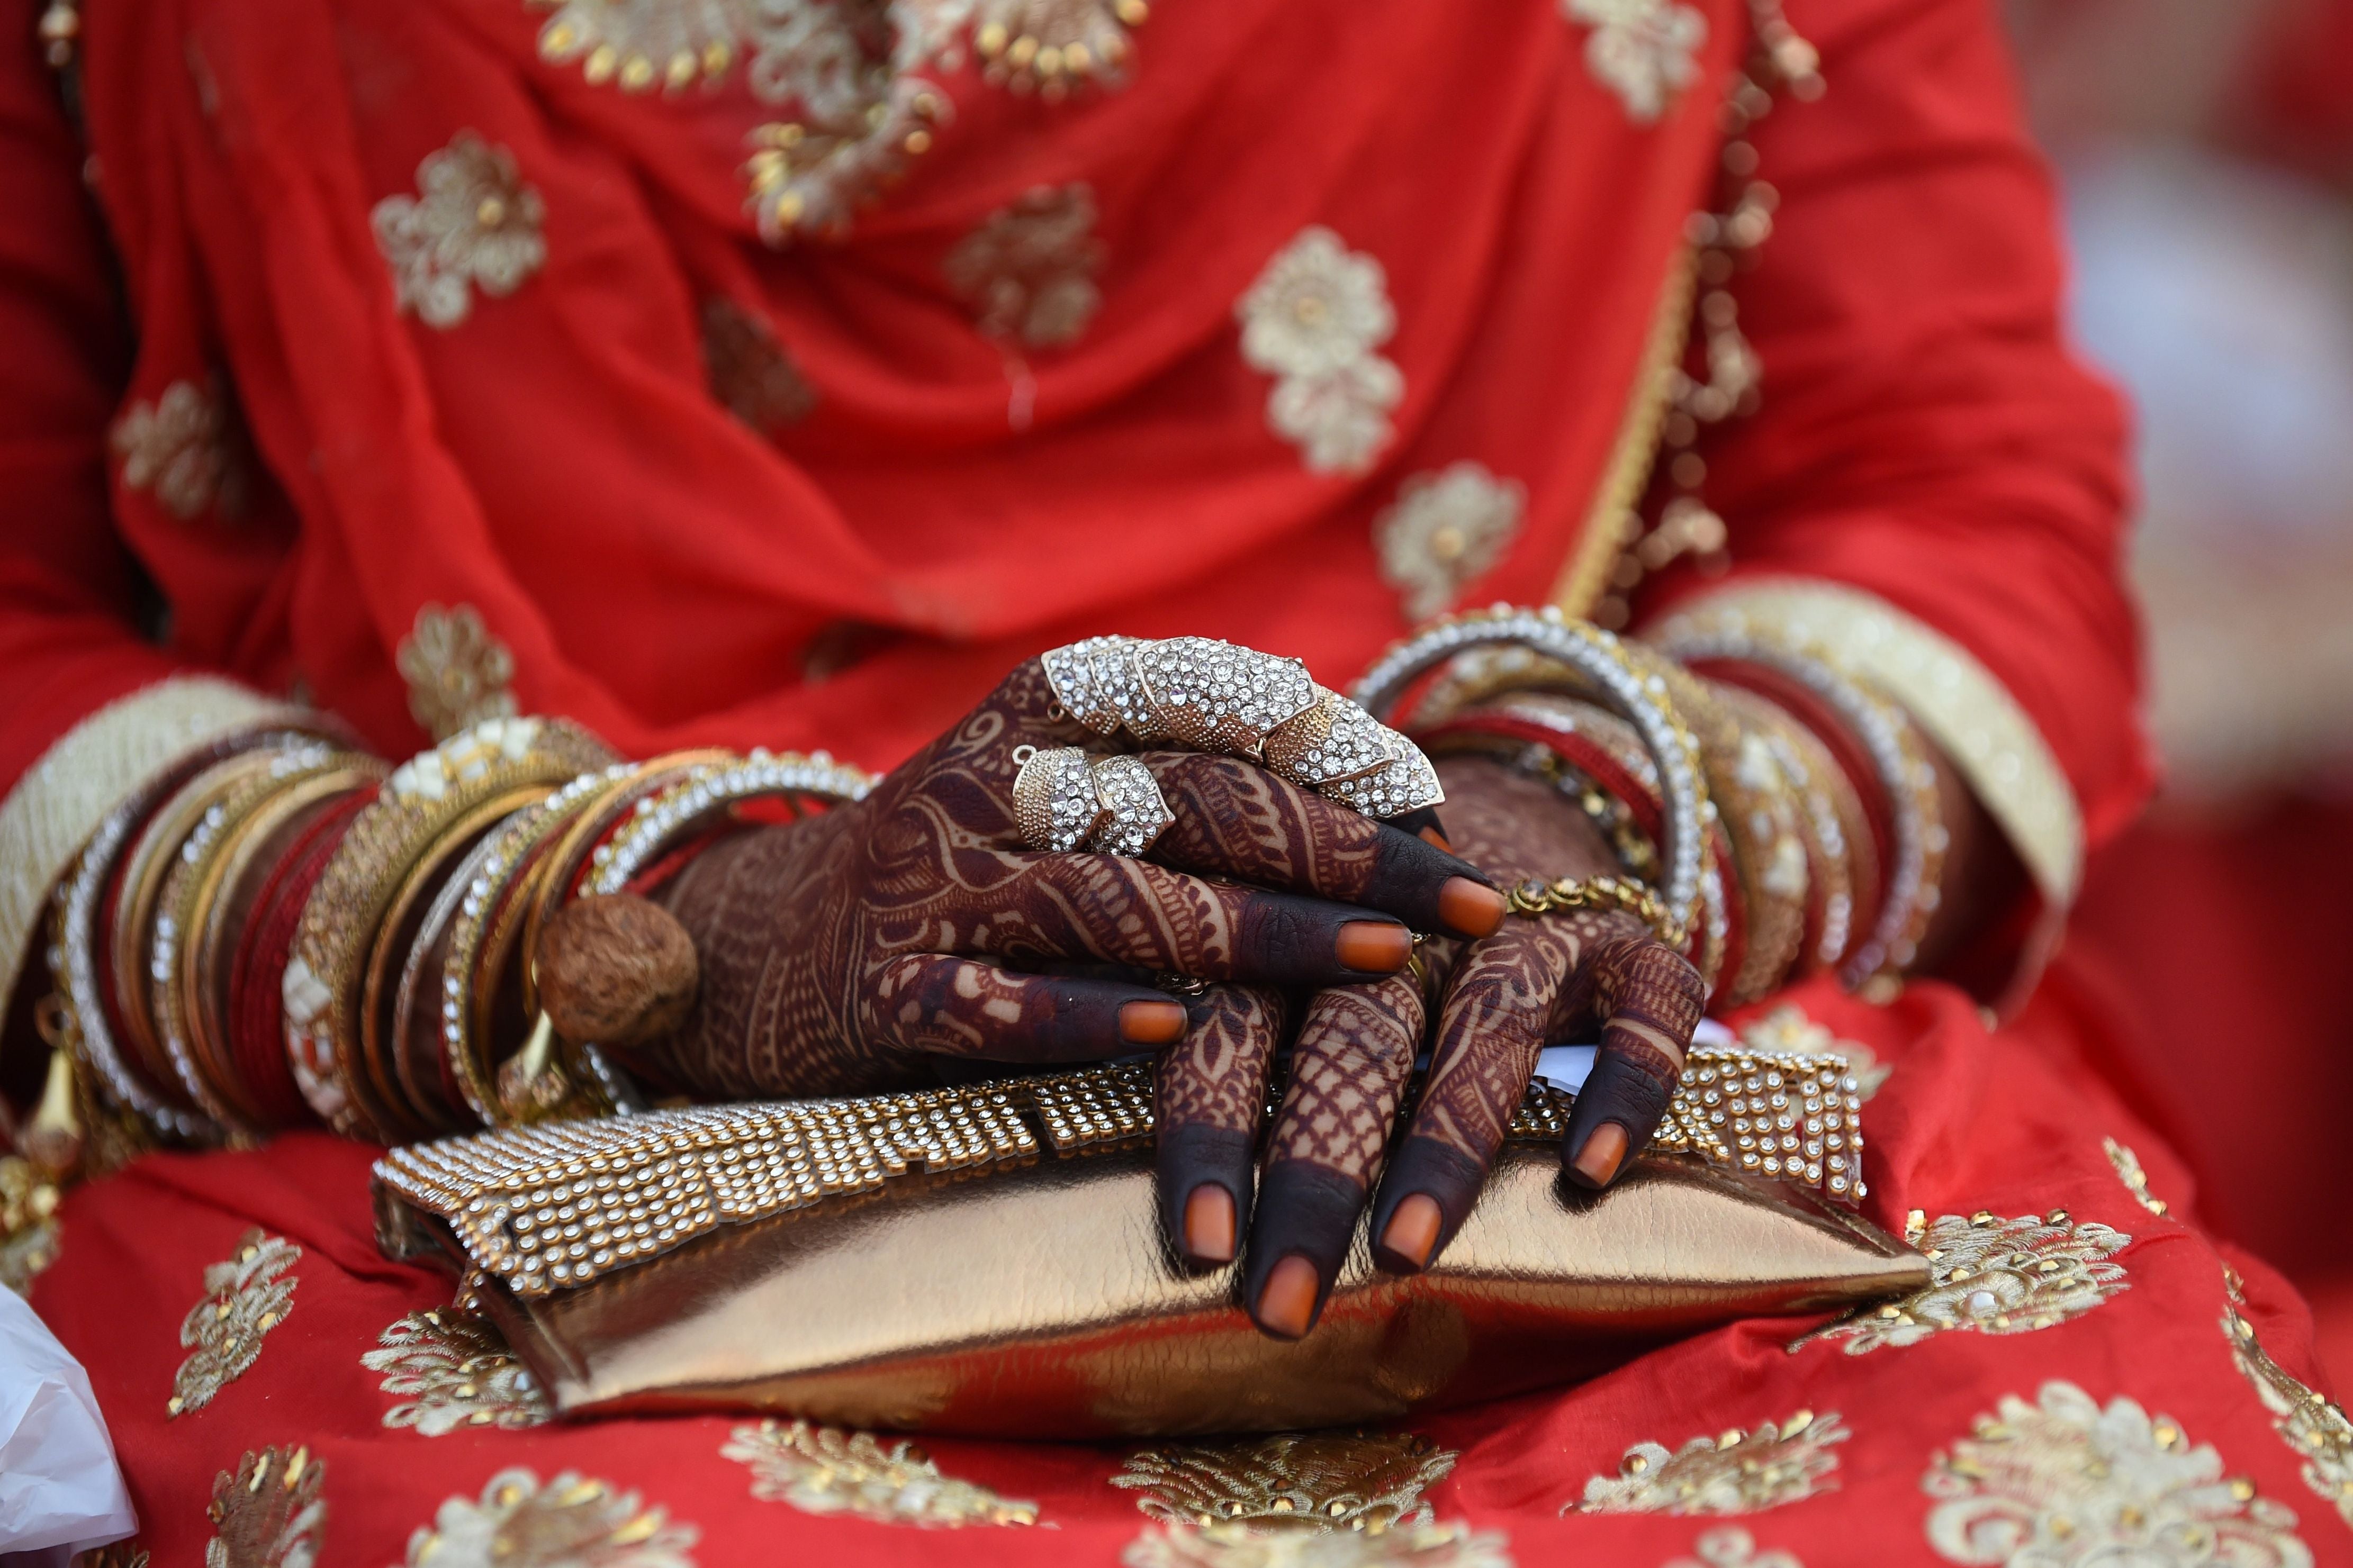 Representative: An Indian bride’s hands decorated with henna